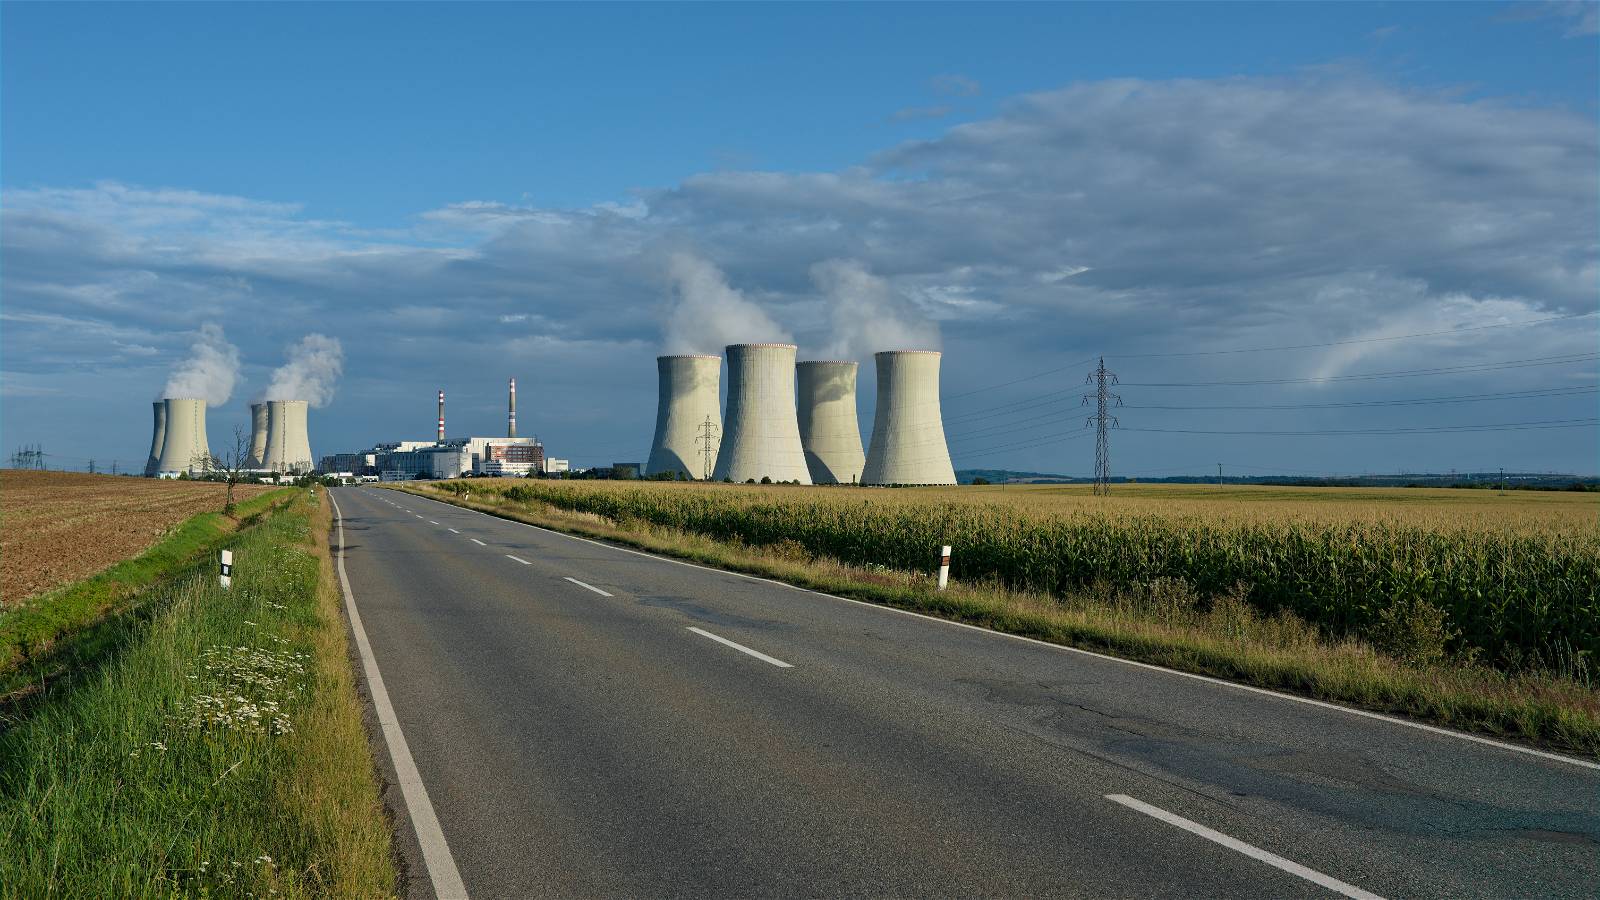 Heavy water: a strategic input for nuclear energy or a waste of vital resources?